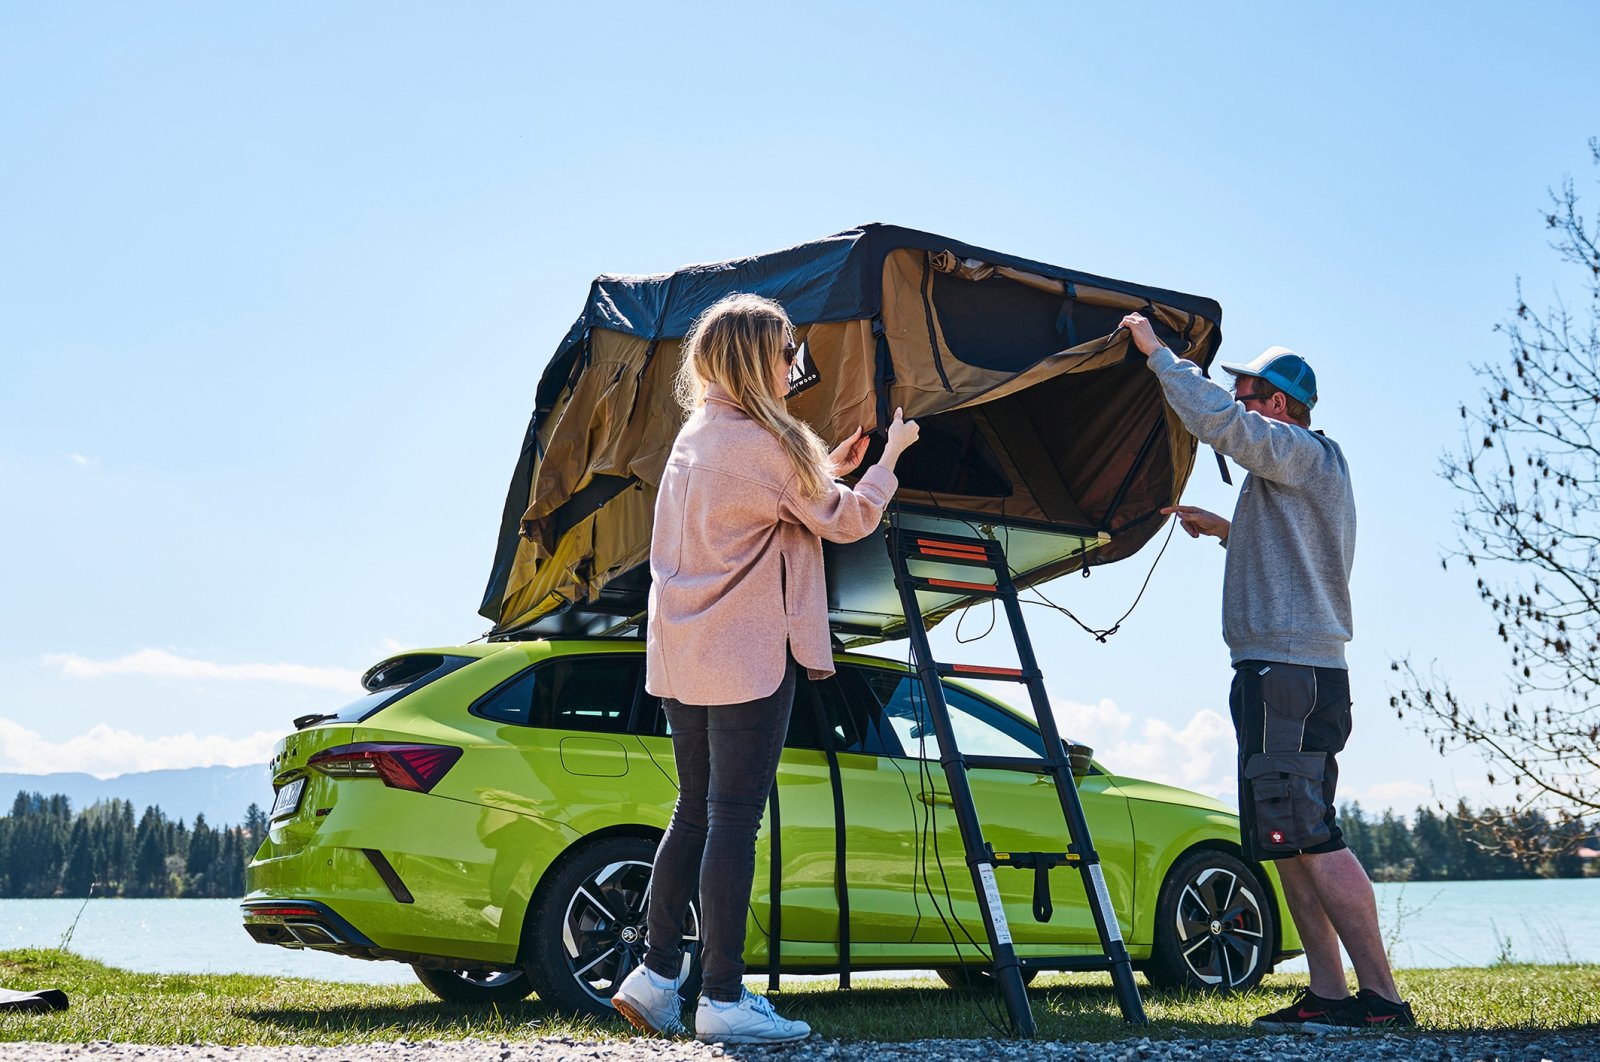 Roof tents are a great alternative if you&#039;re not a fan of camping near bugs and mud on the forest floor, June 6, 2022. (DPA Photo)